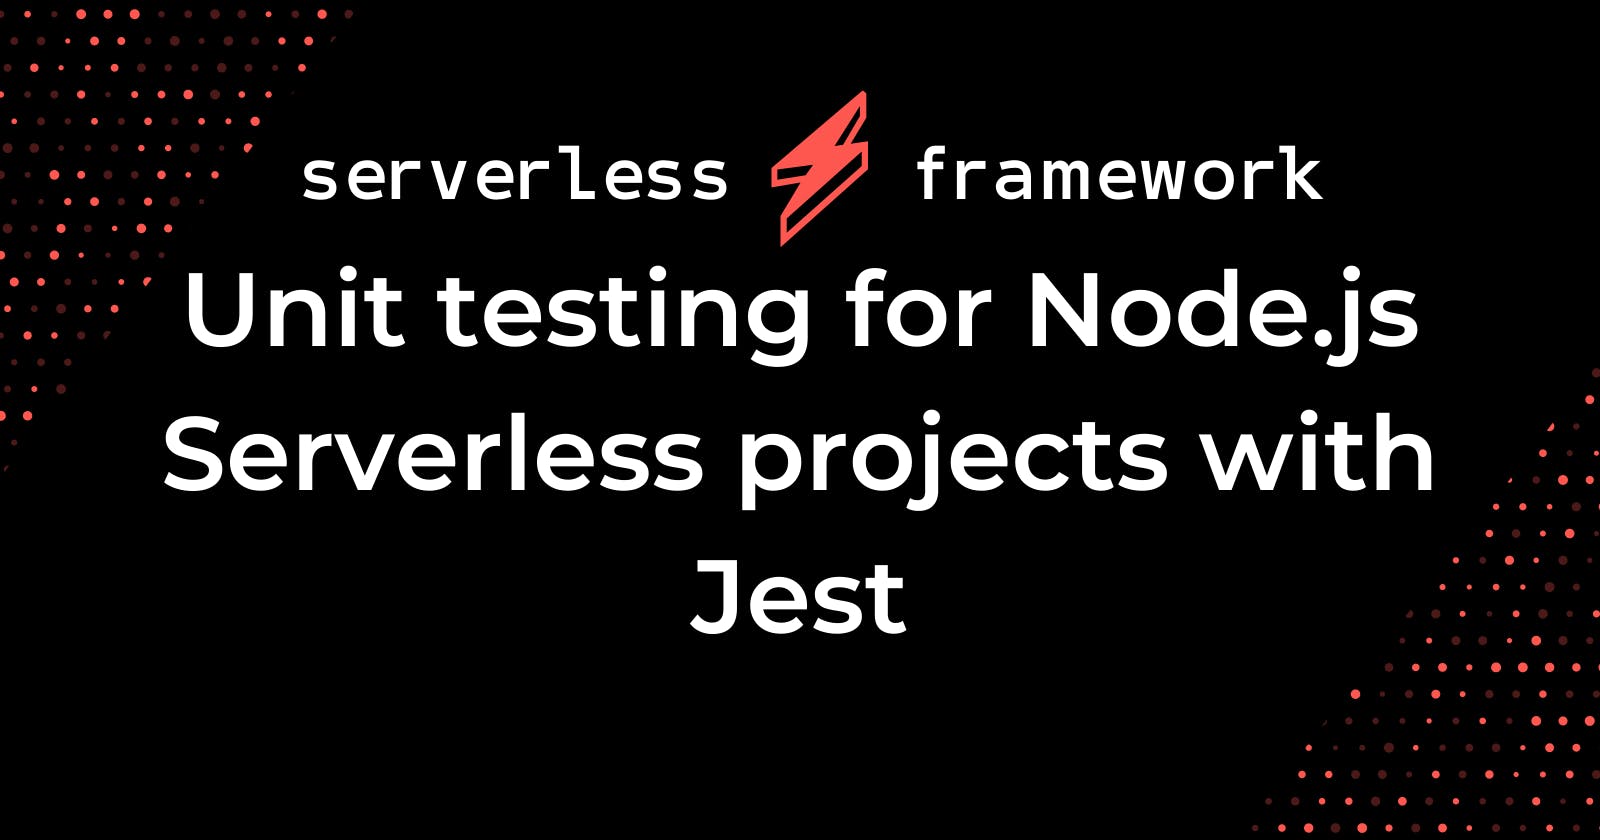 Unit testing for Node.js Serverless projects with Jest